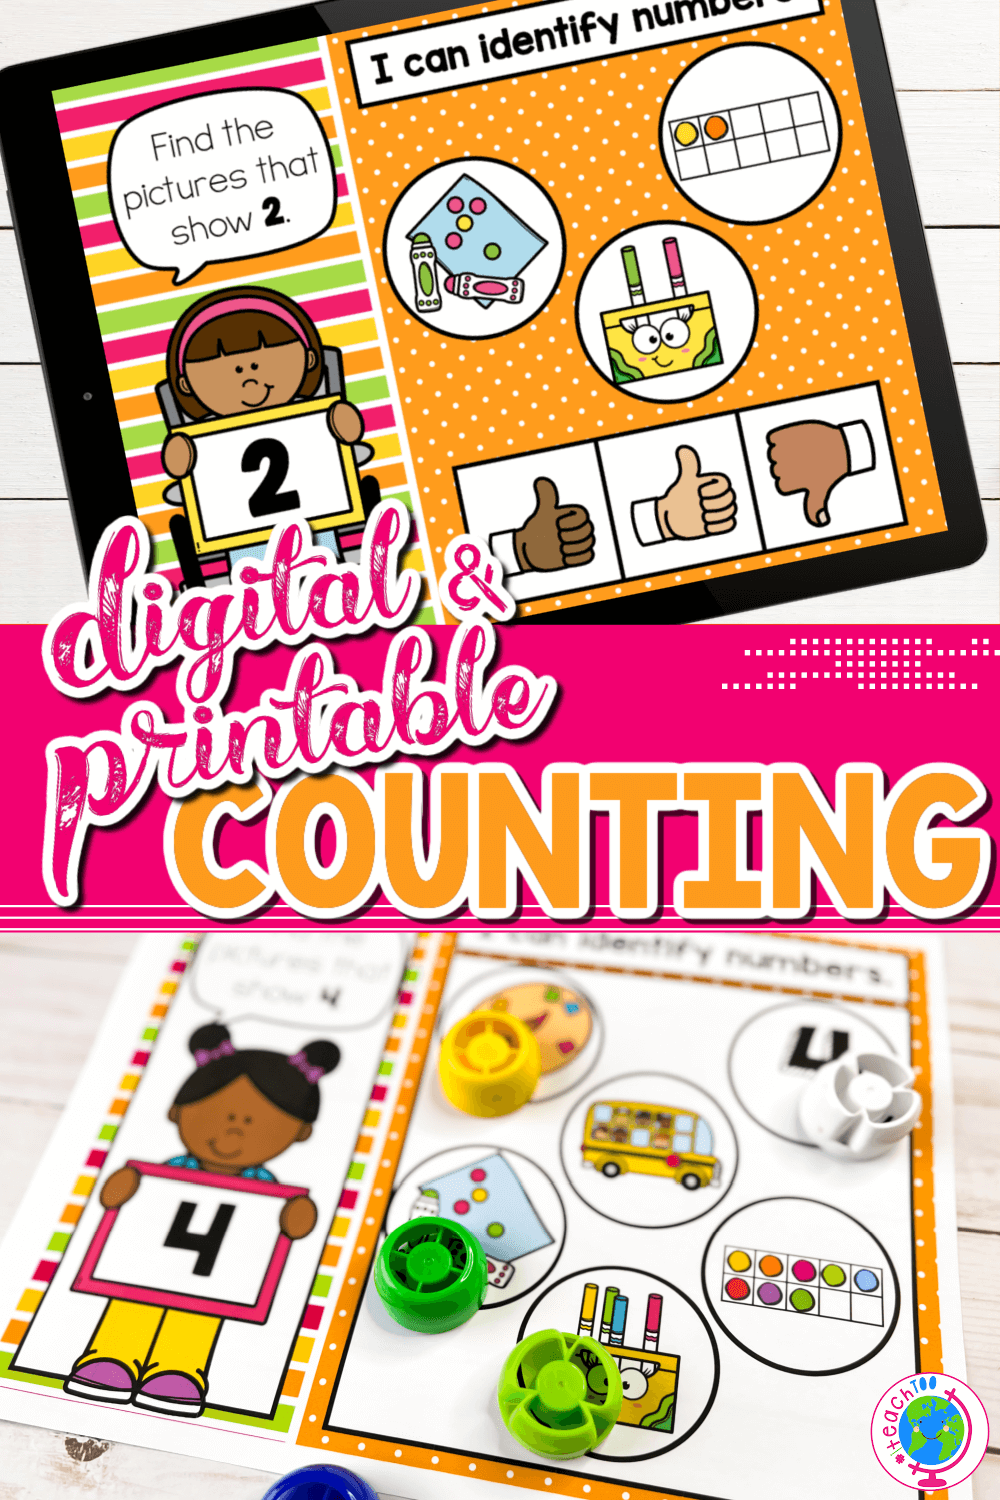 Free Digital and Printable Number Identification Game for Preschool